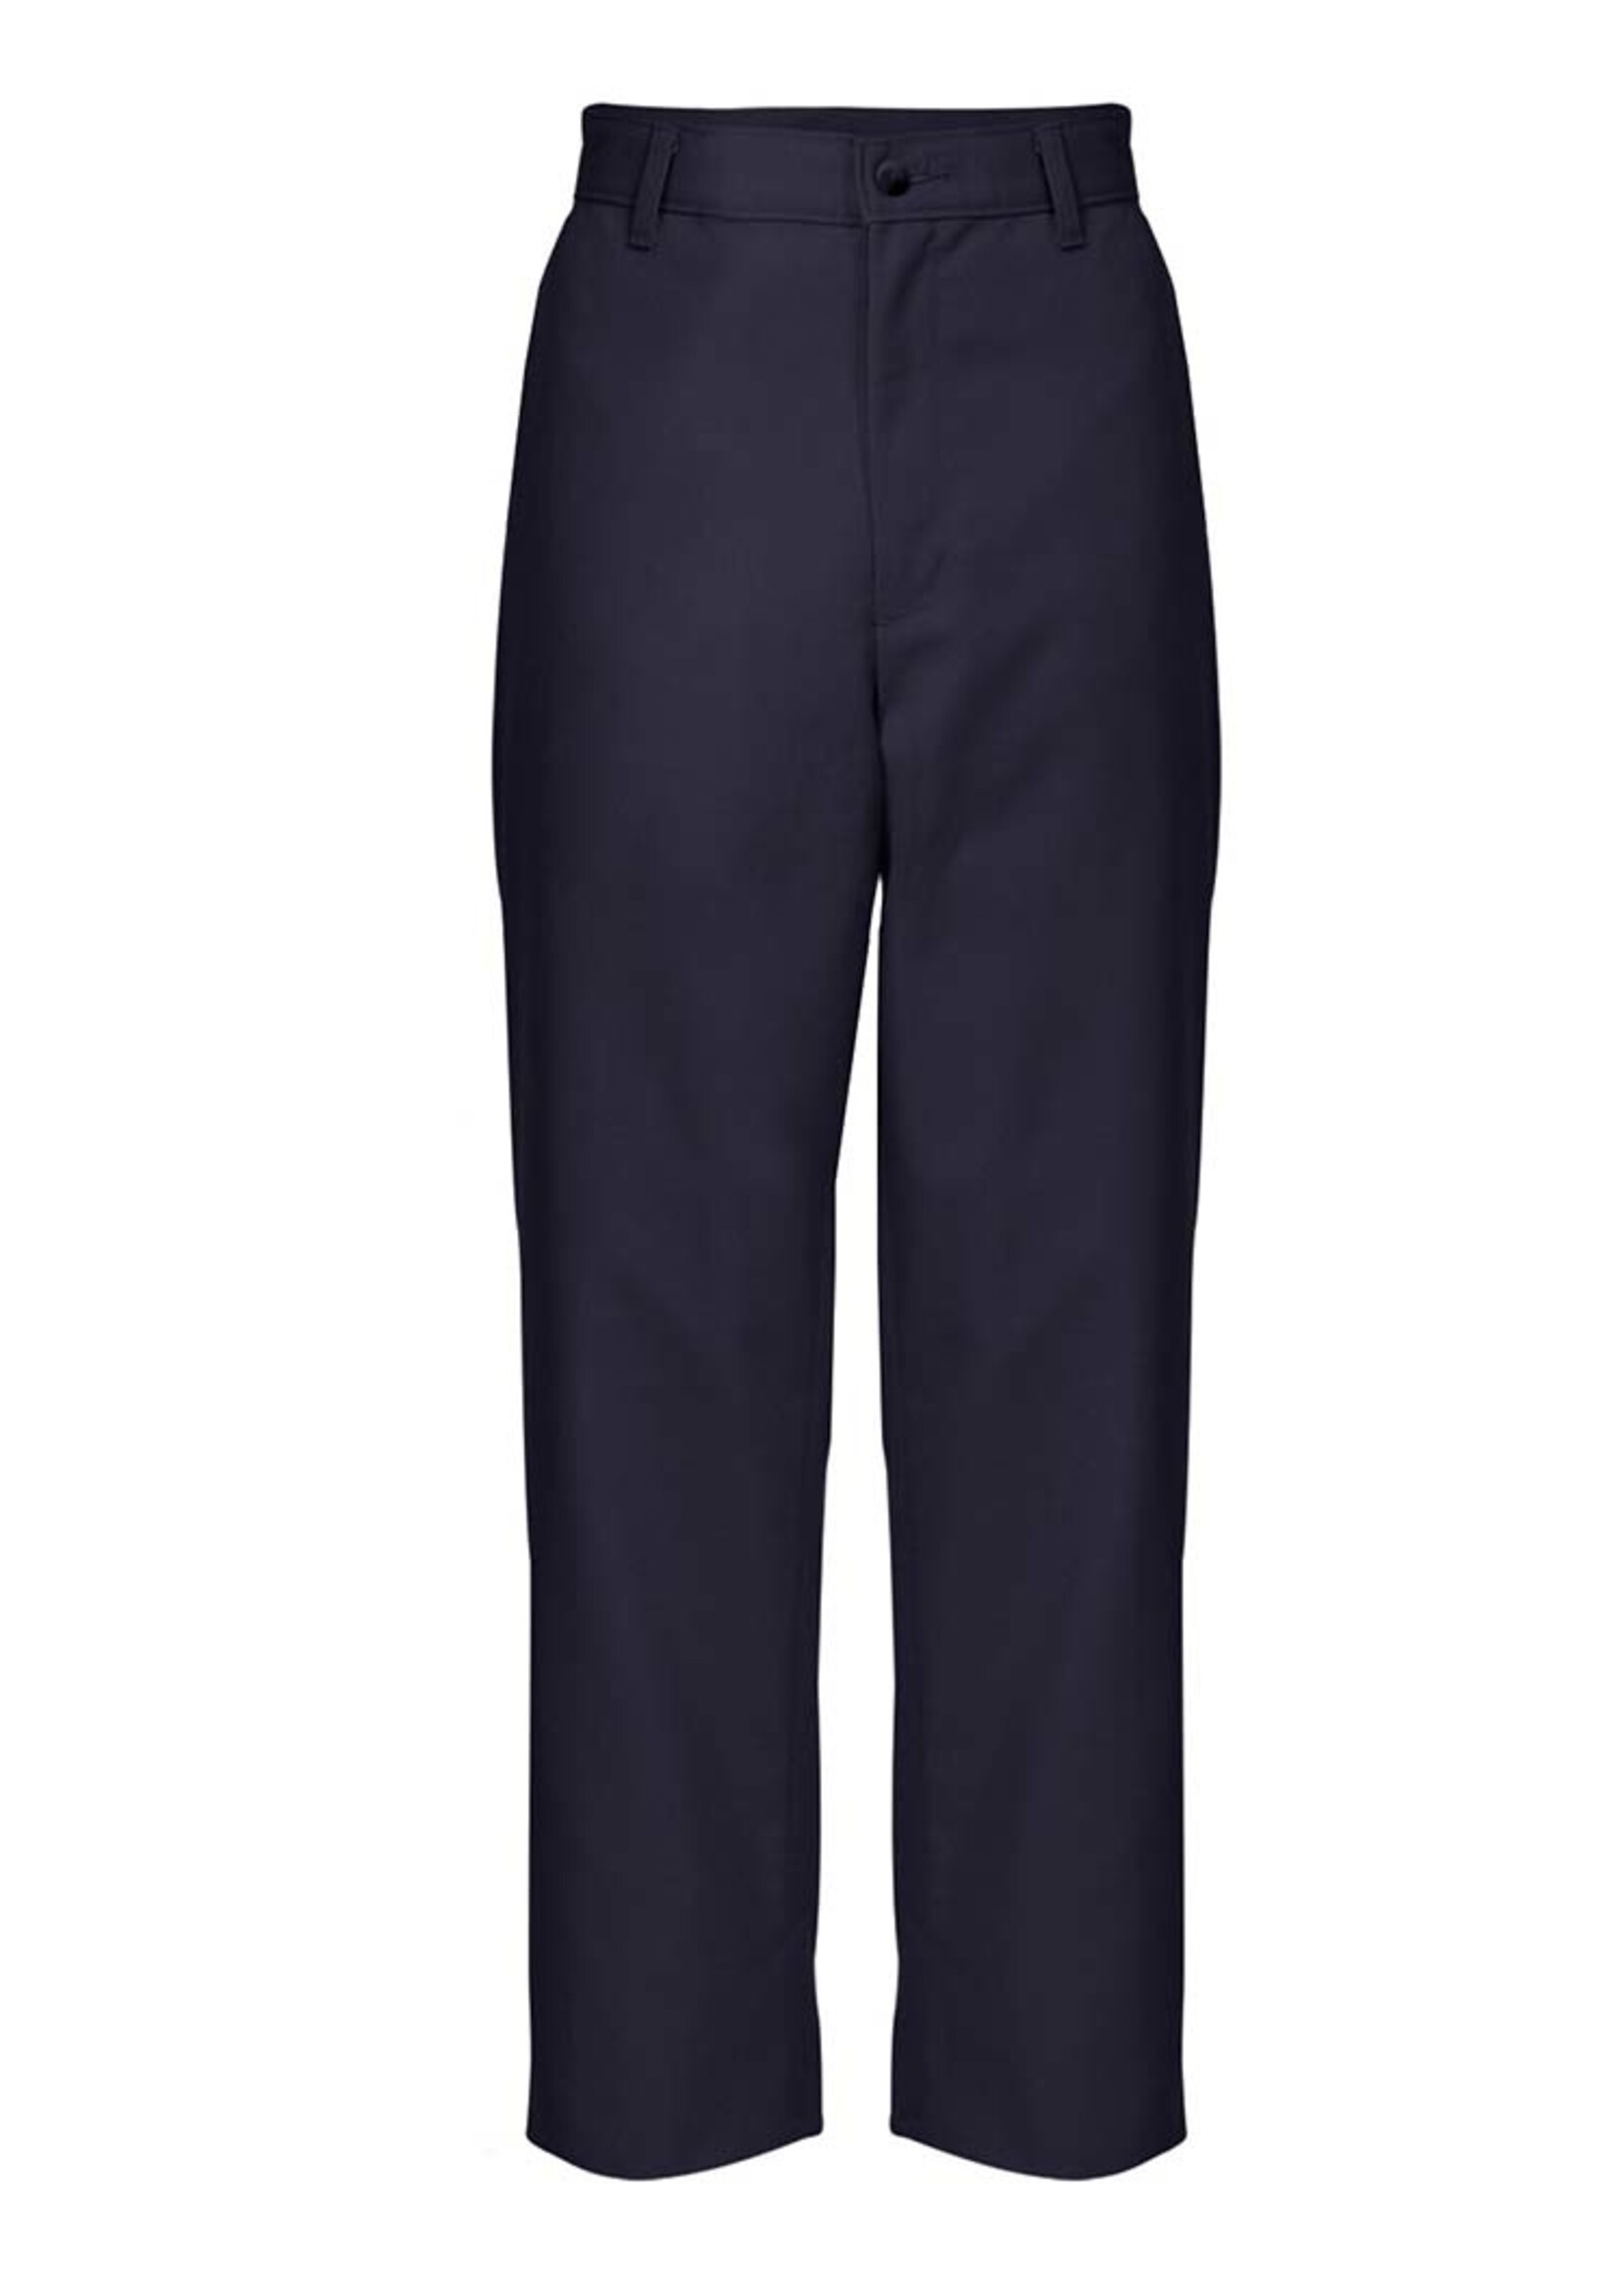 Mens Navy Flat Front Pants  with logo